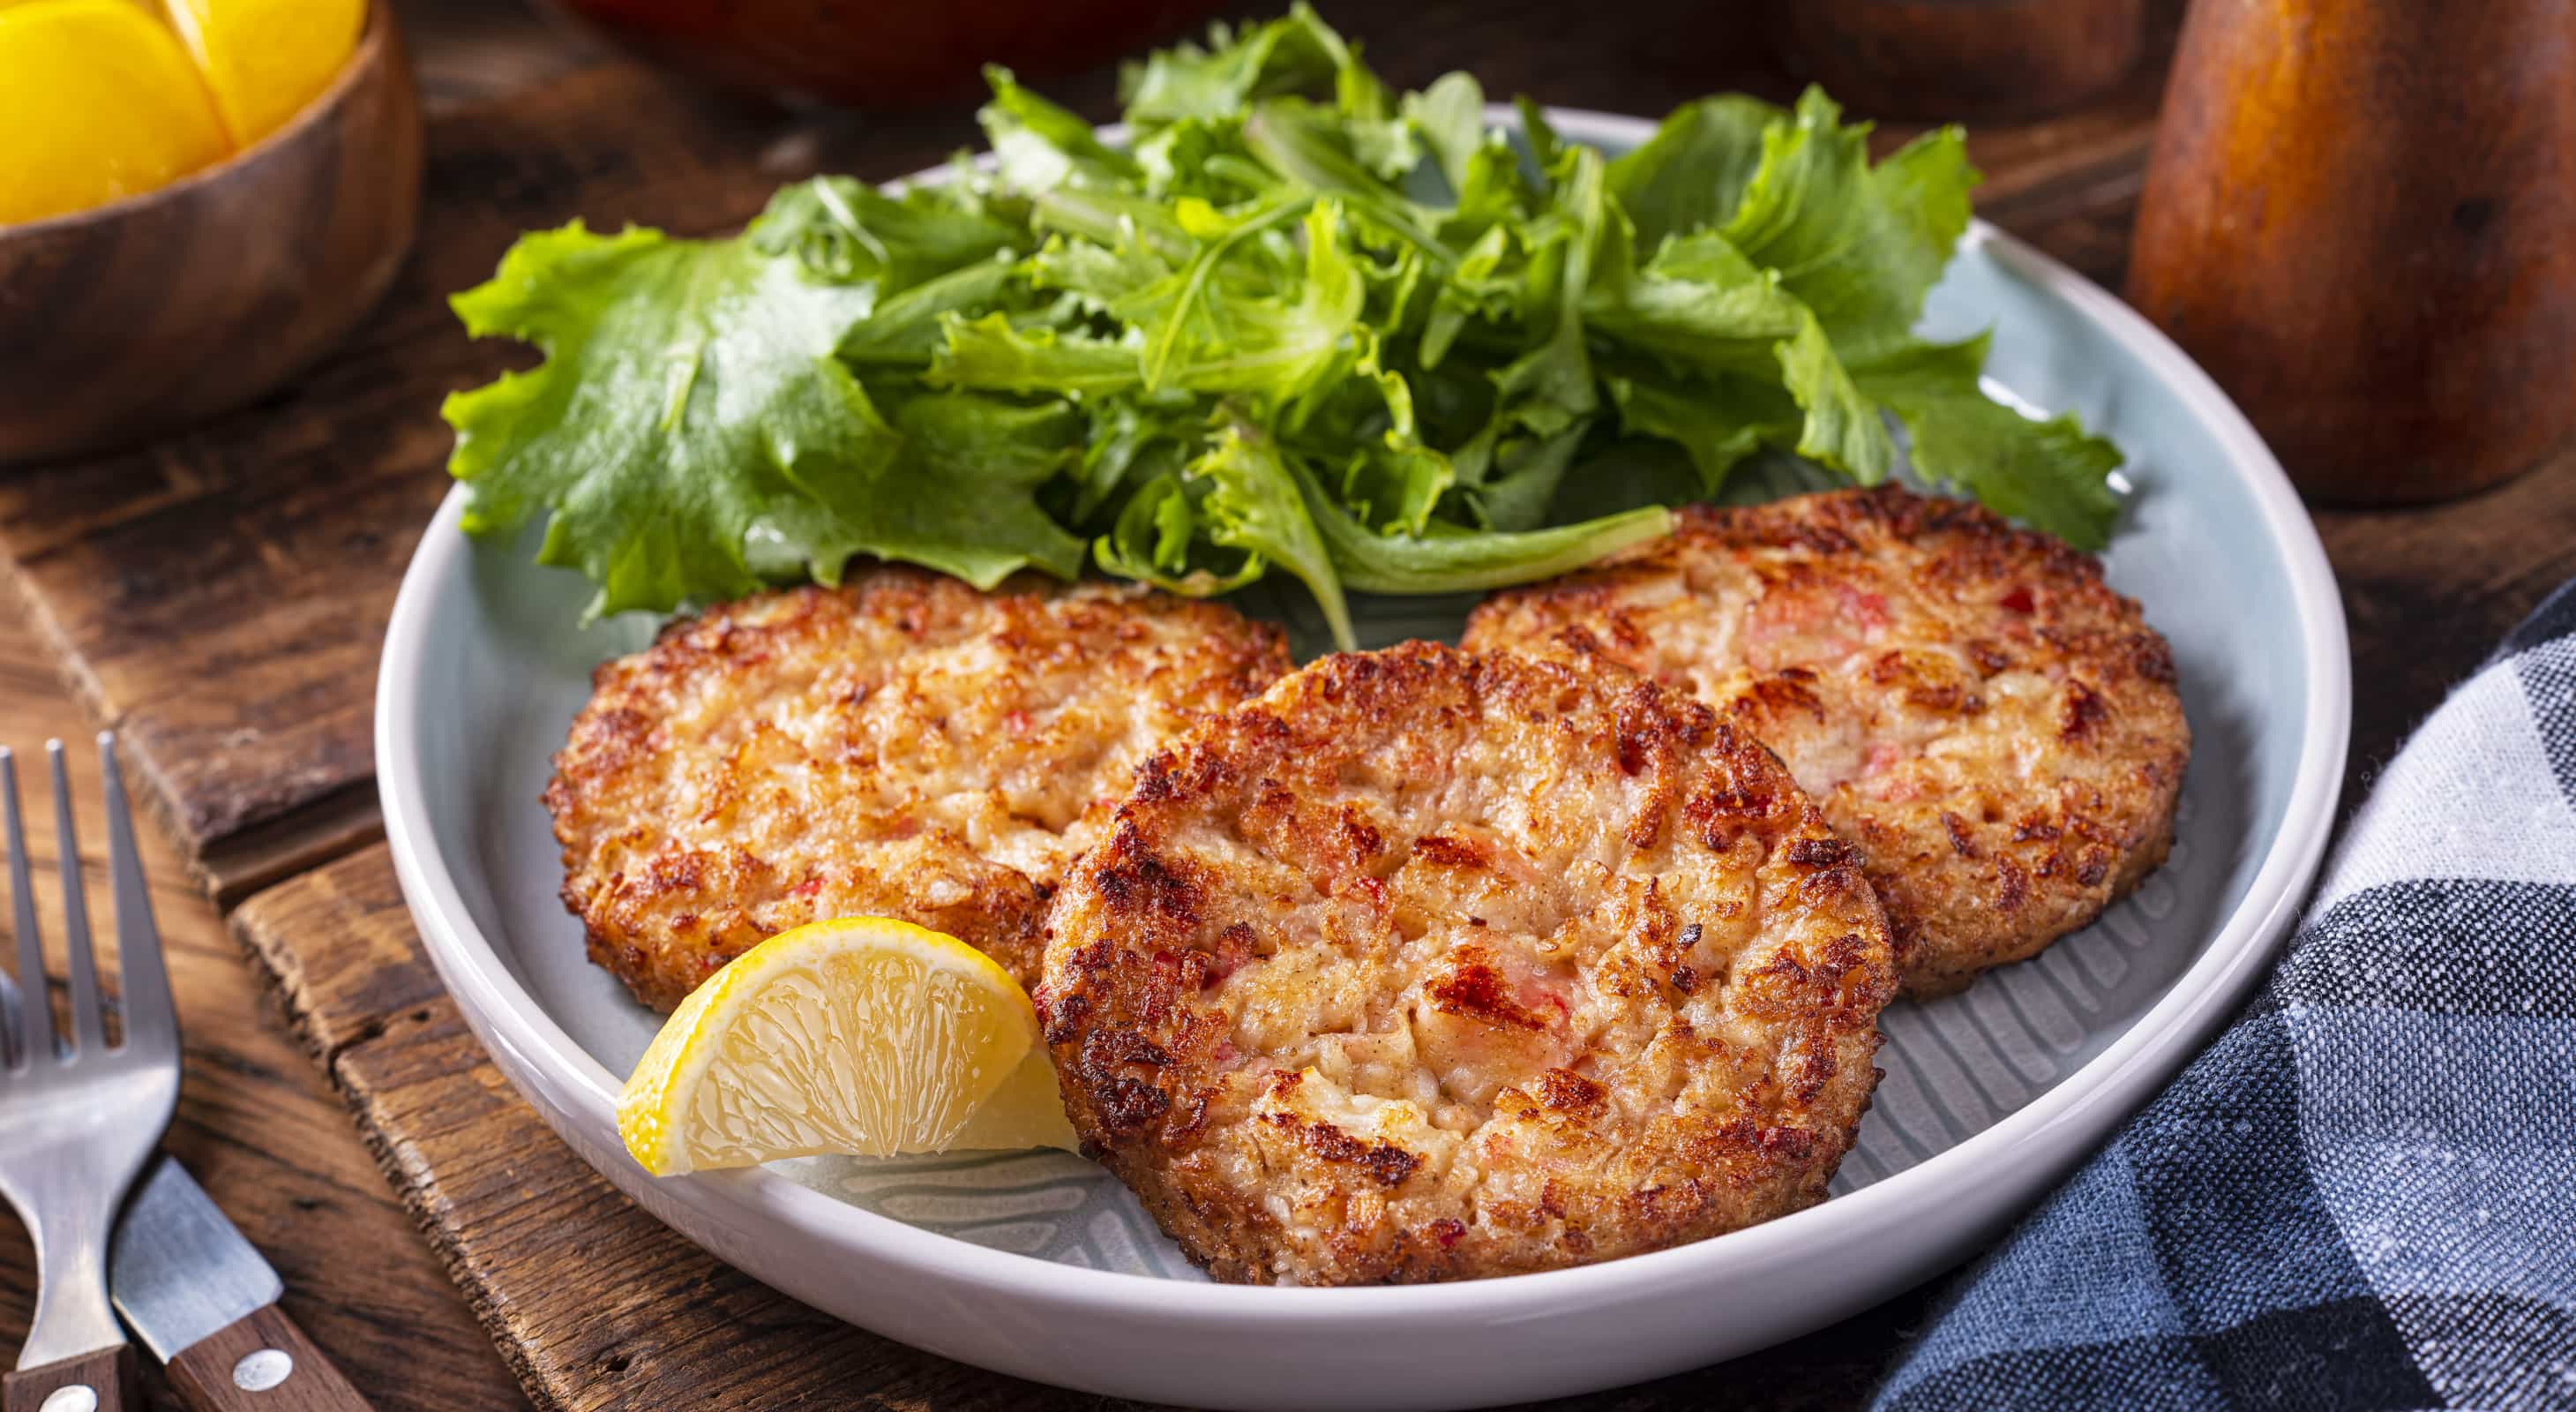 Crab cake served with a salad